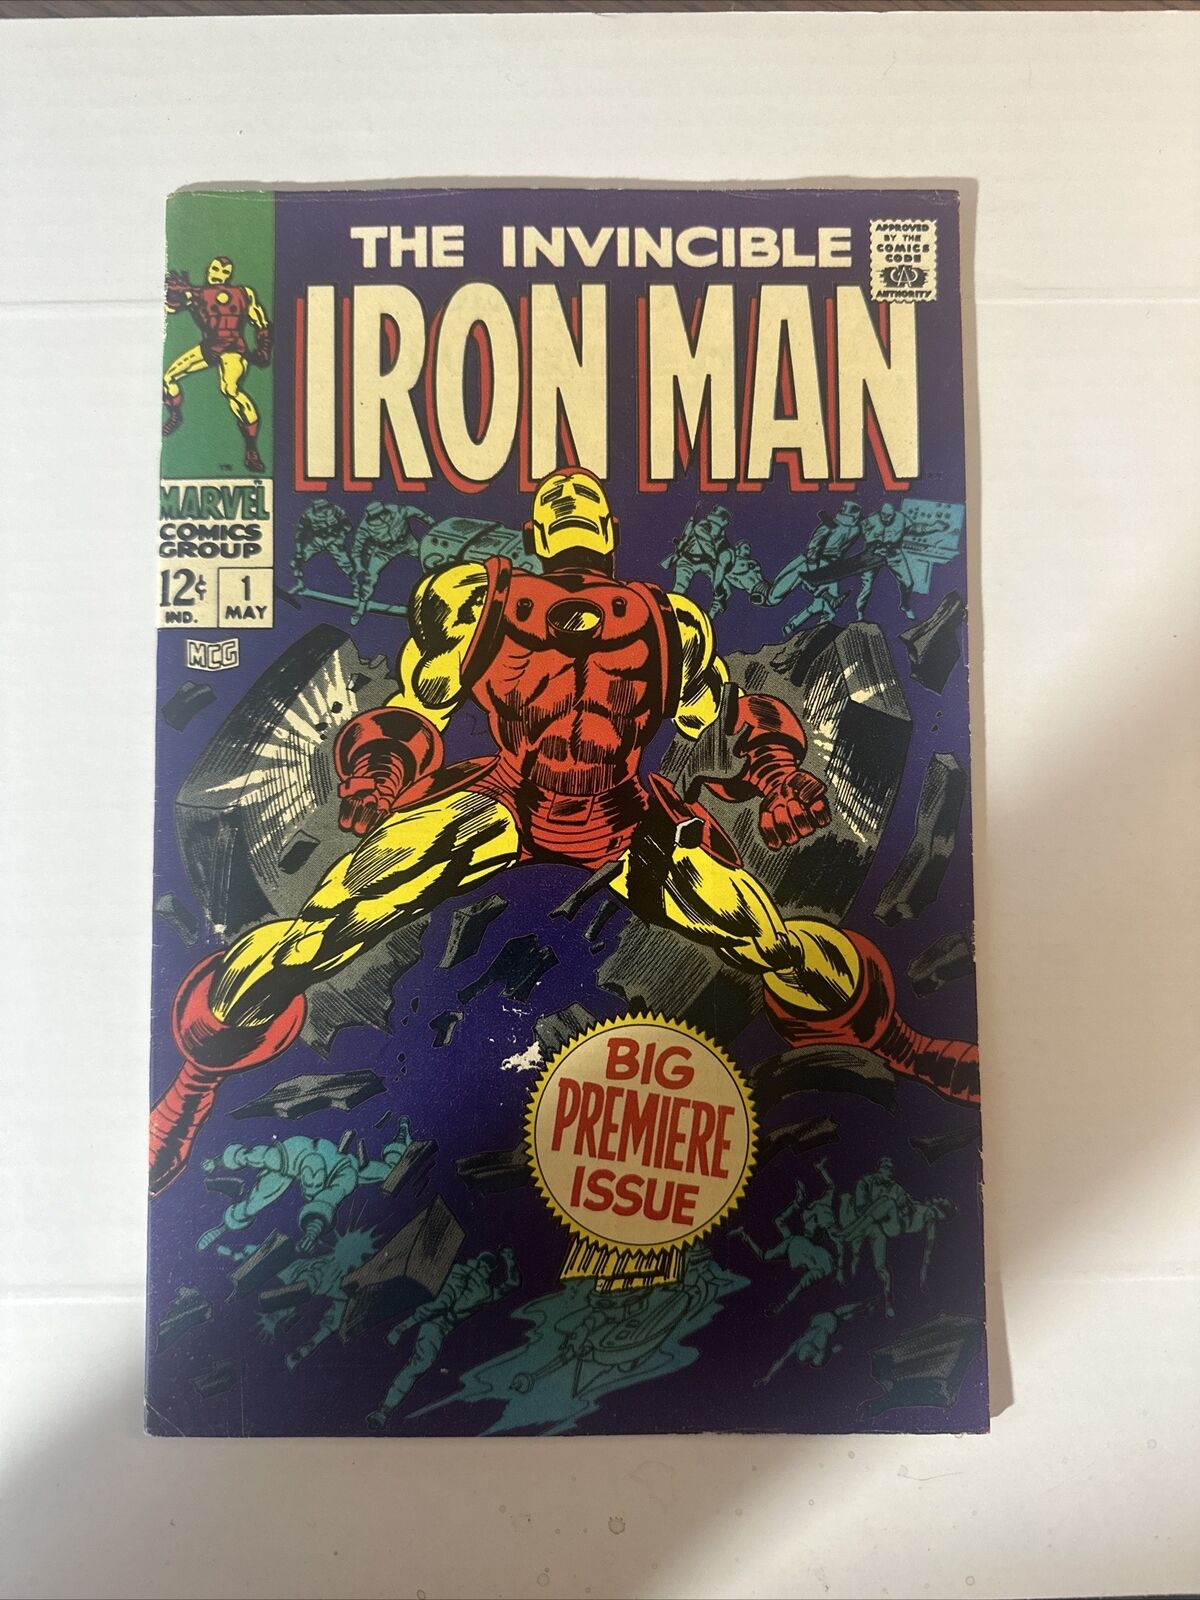 The Invincible Iron Man #1 Marvel Comics 1968 Excellent SEE PHOTOS